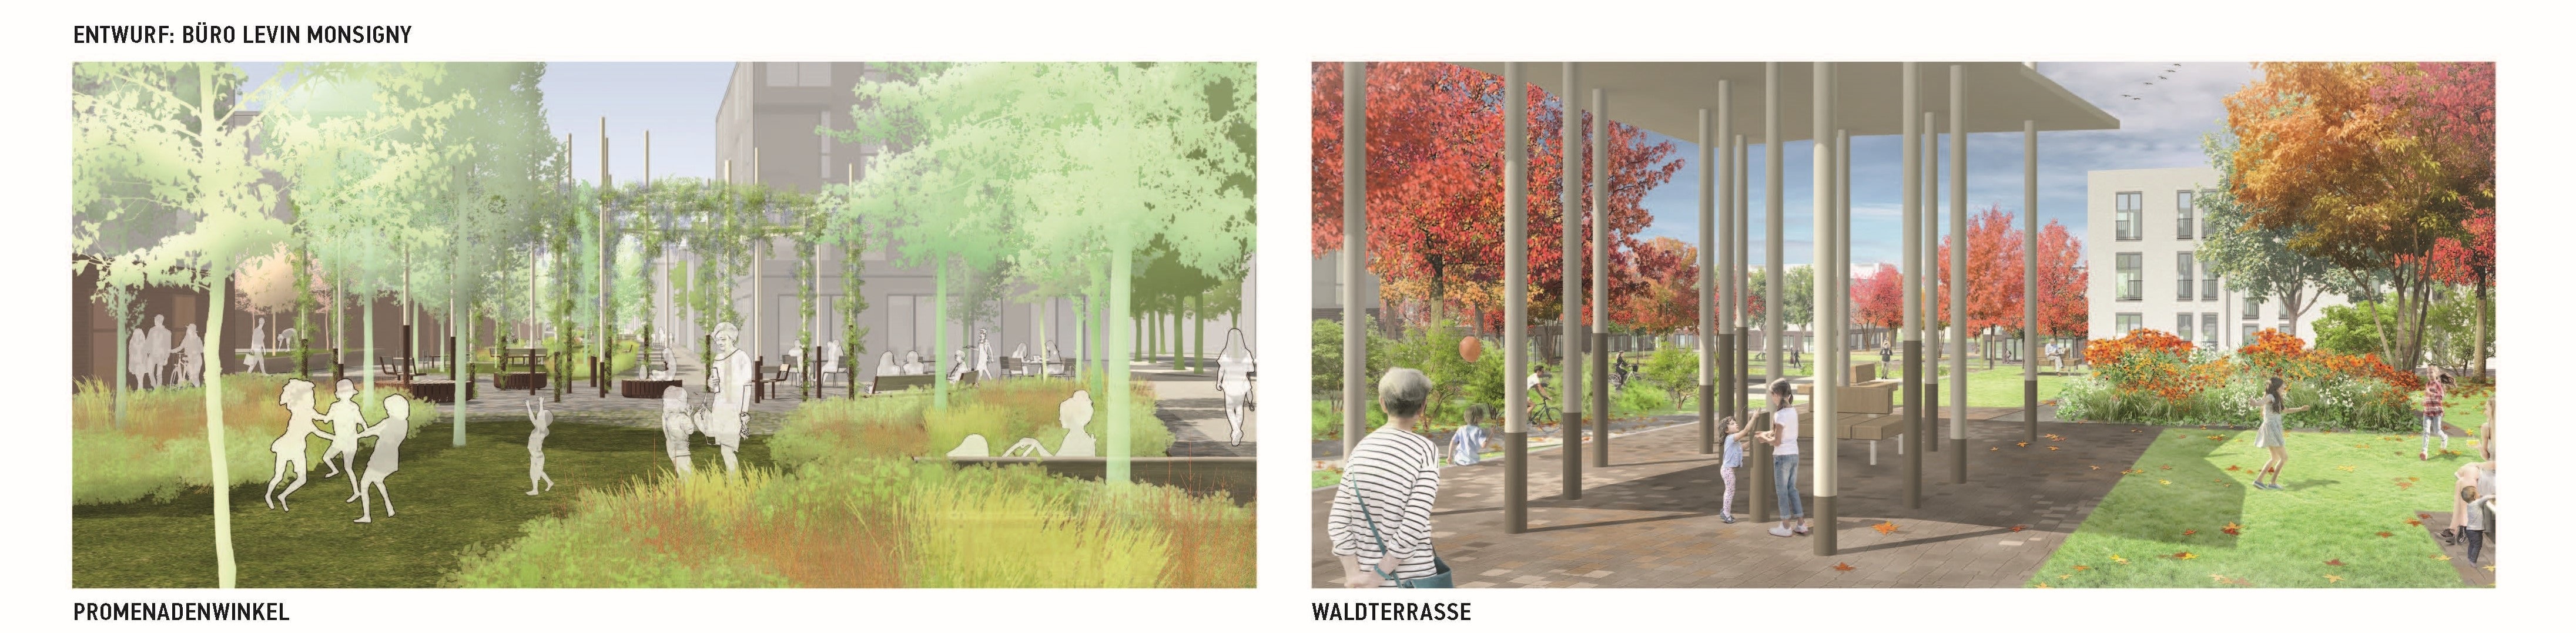 Designs of the promenade angle and the forest terrace